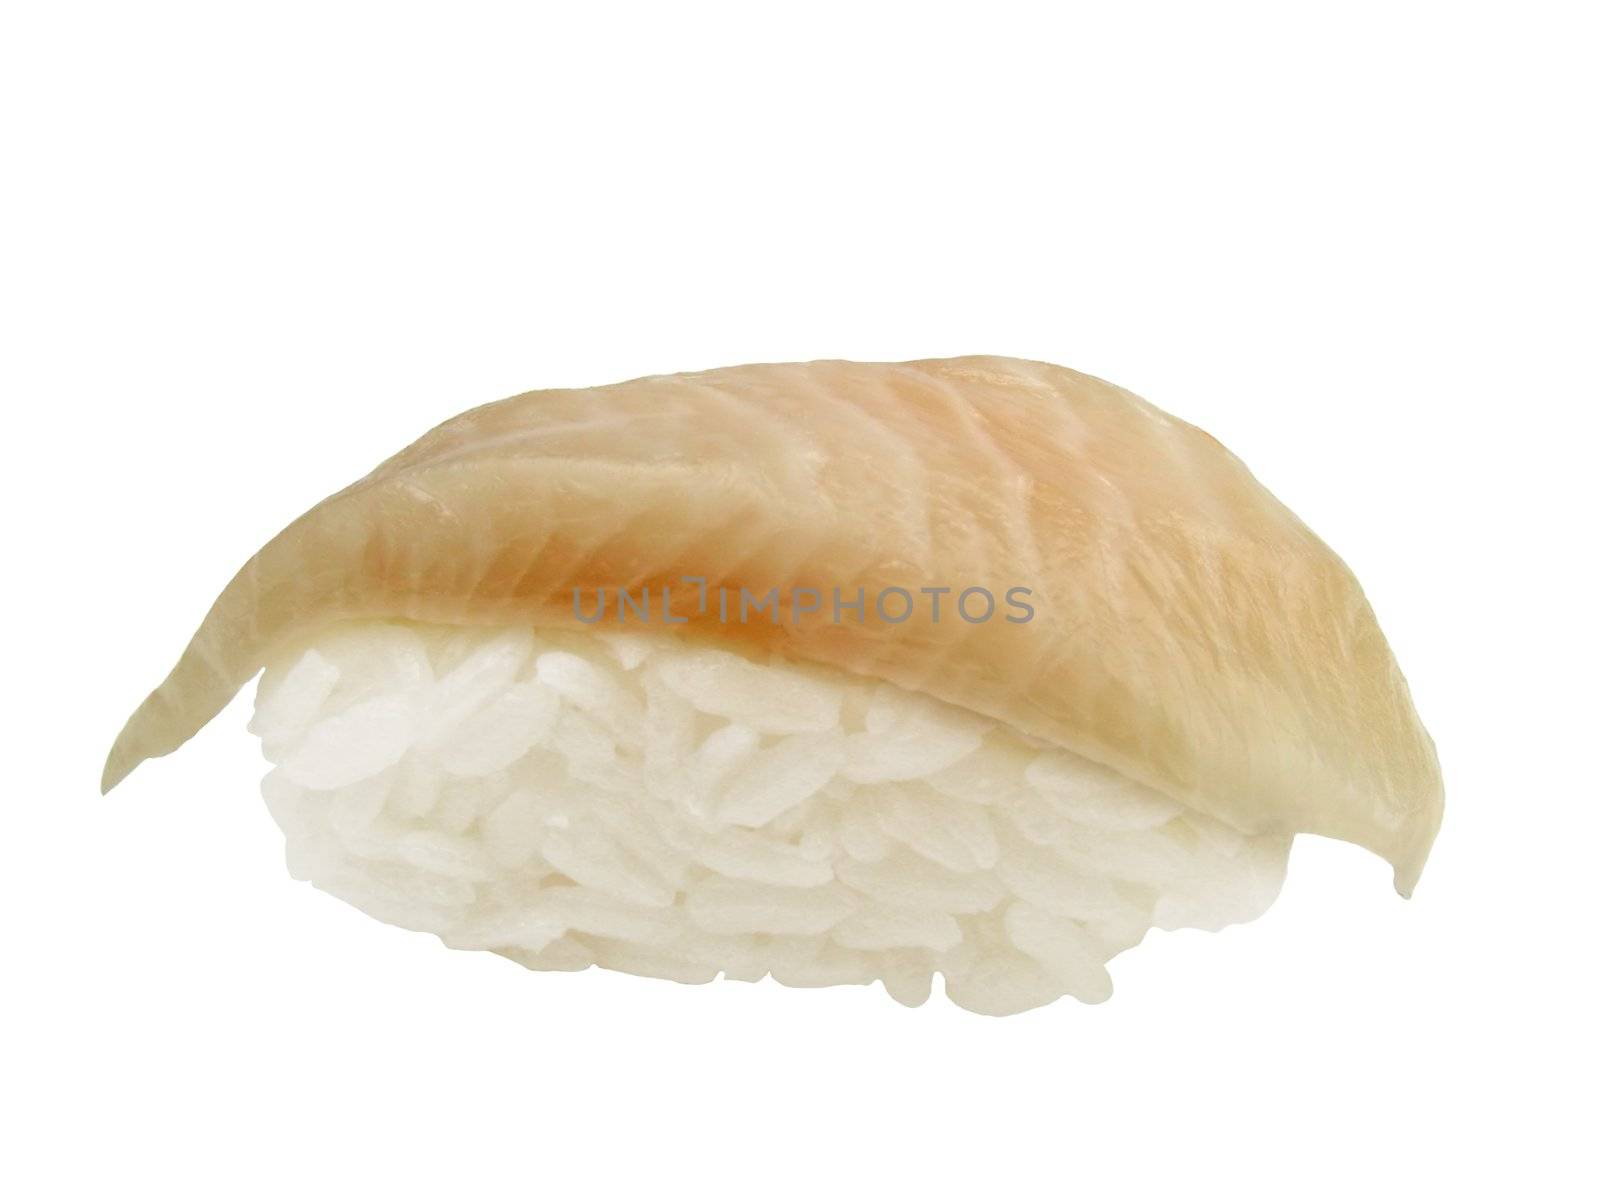        A very common white fish sushi-halibut 